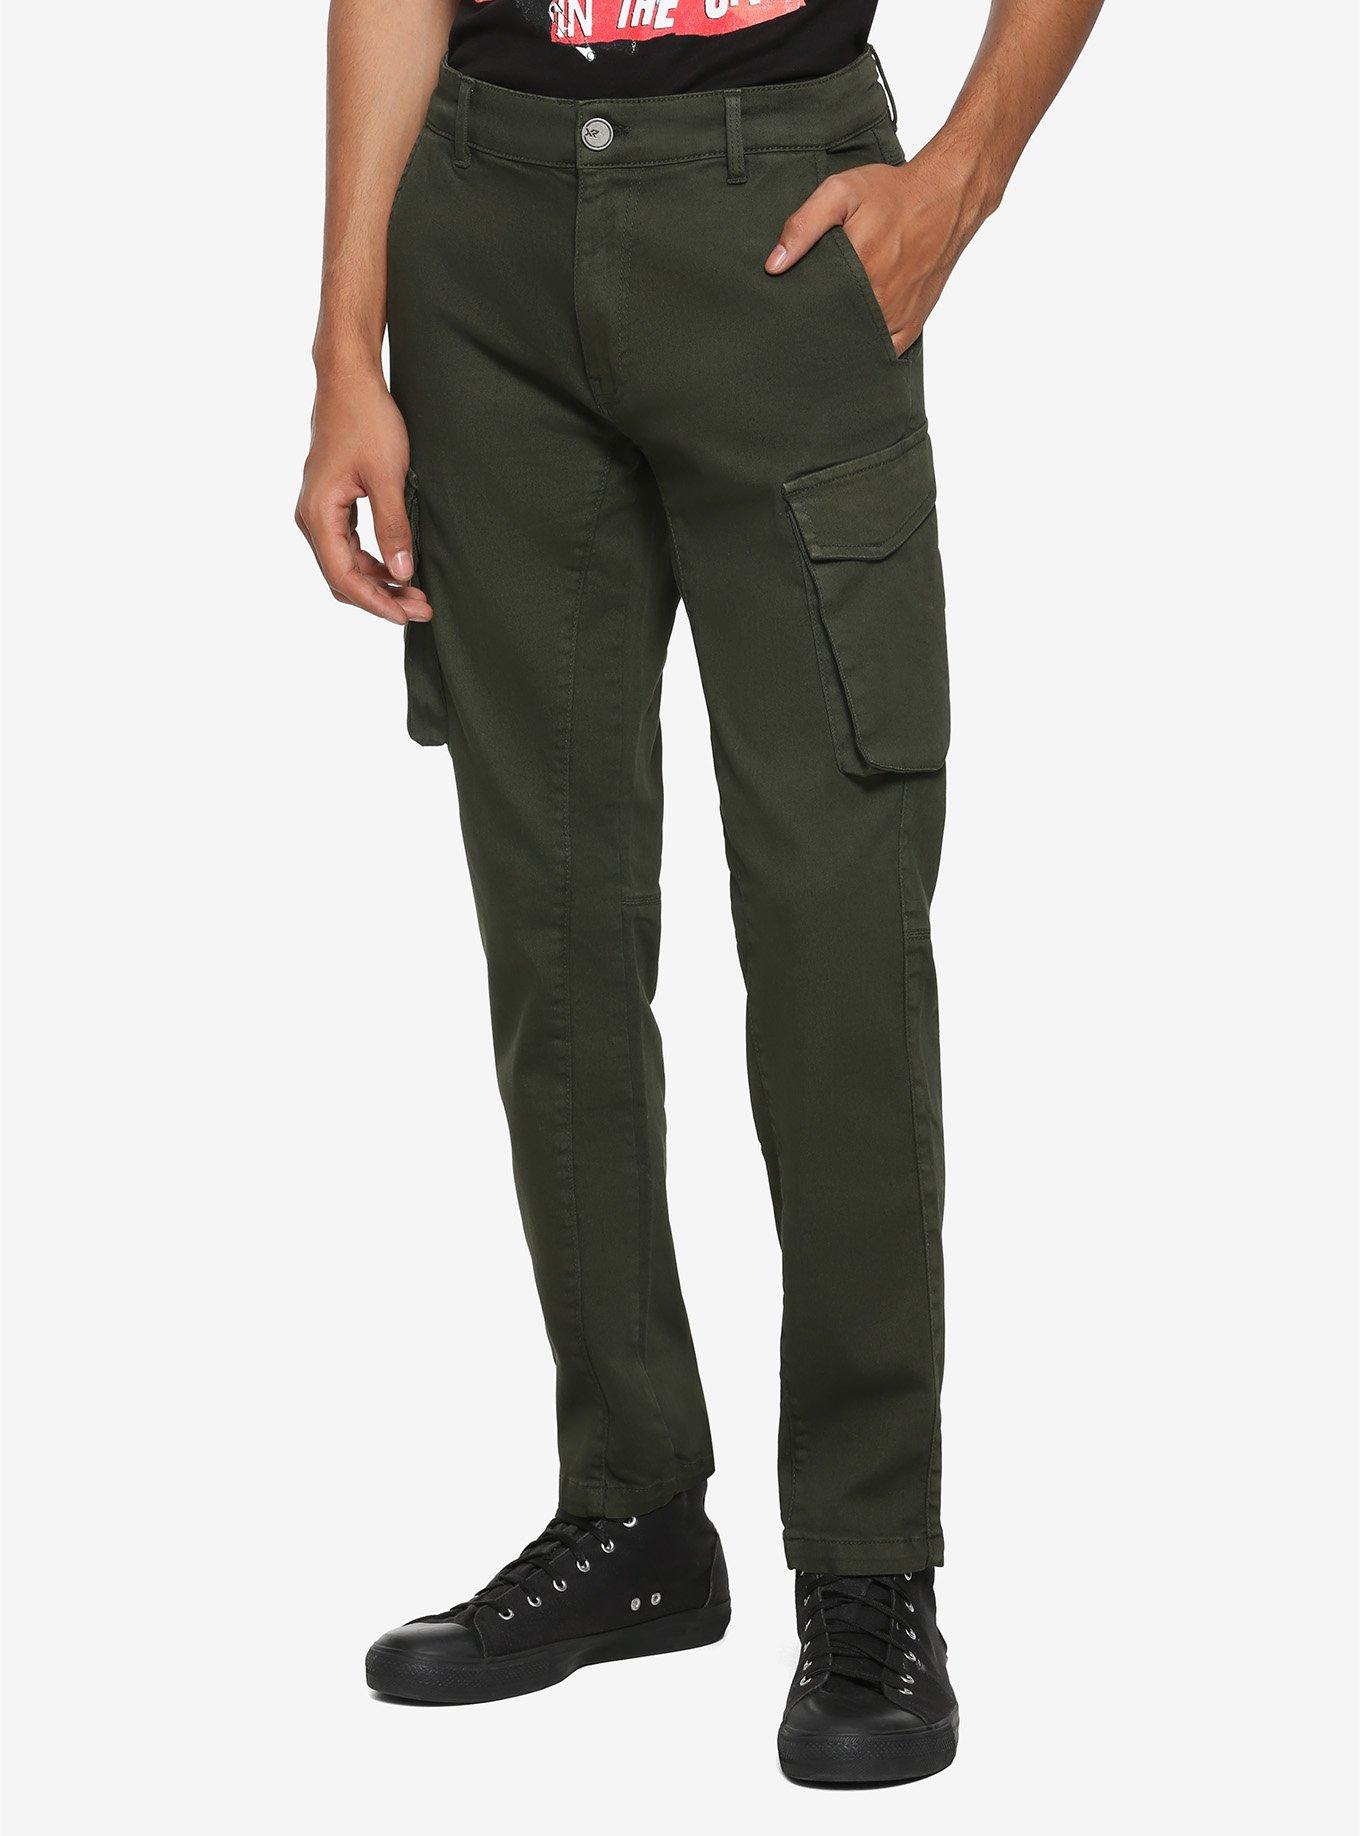 Olive Cargo Pants | Hot Topic